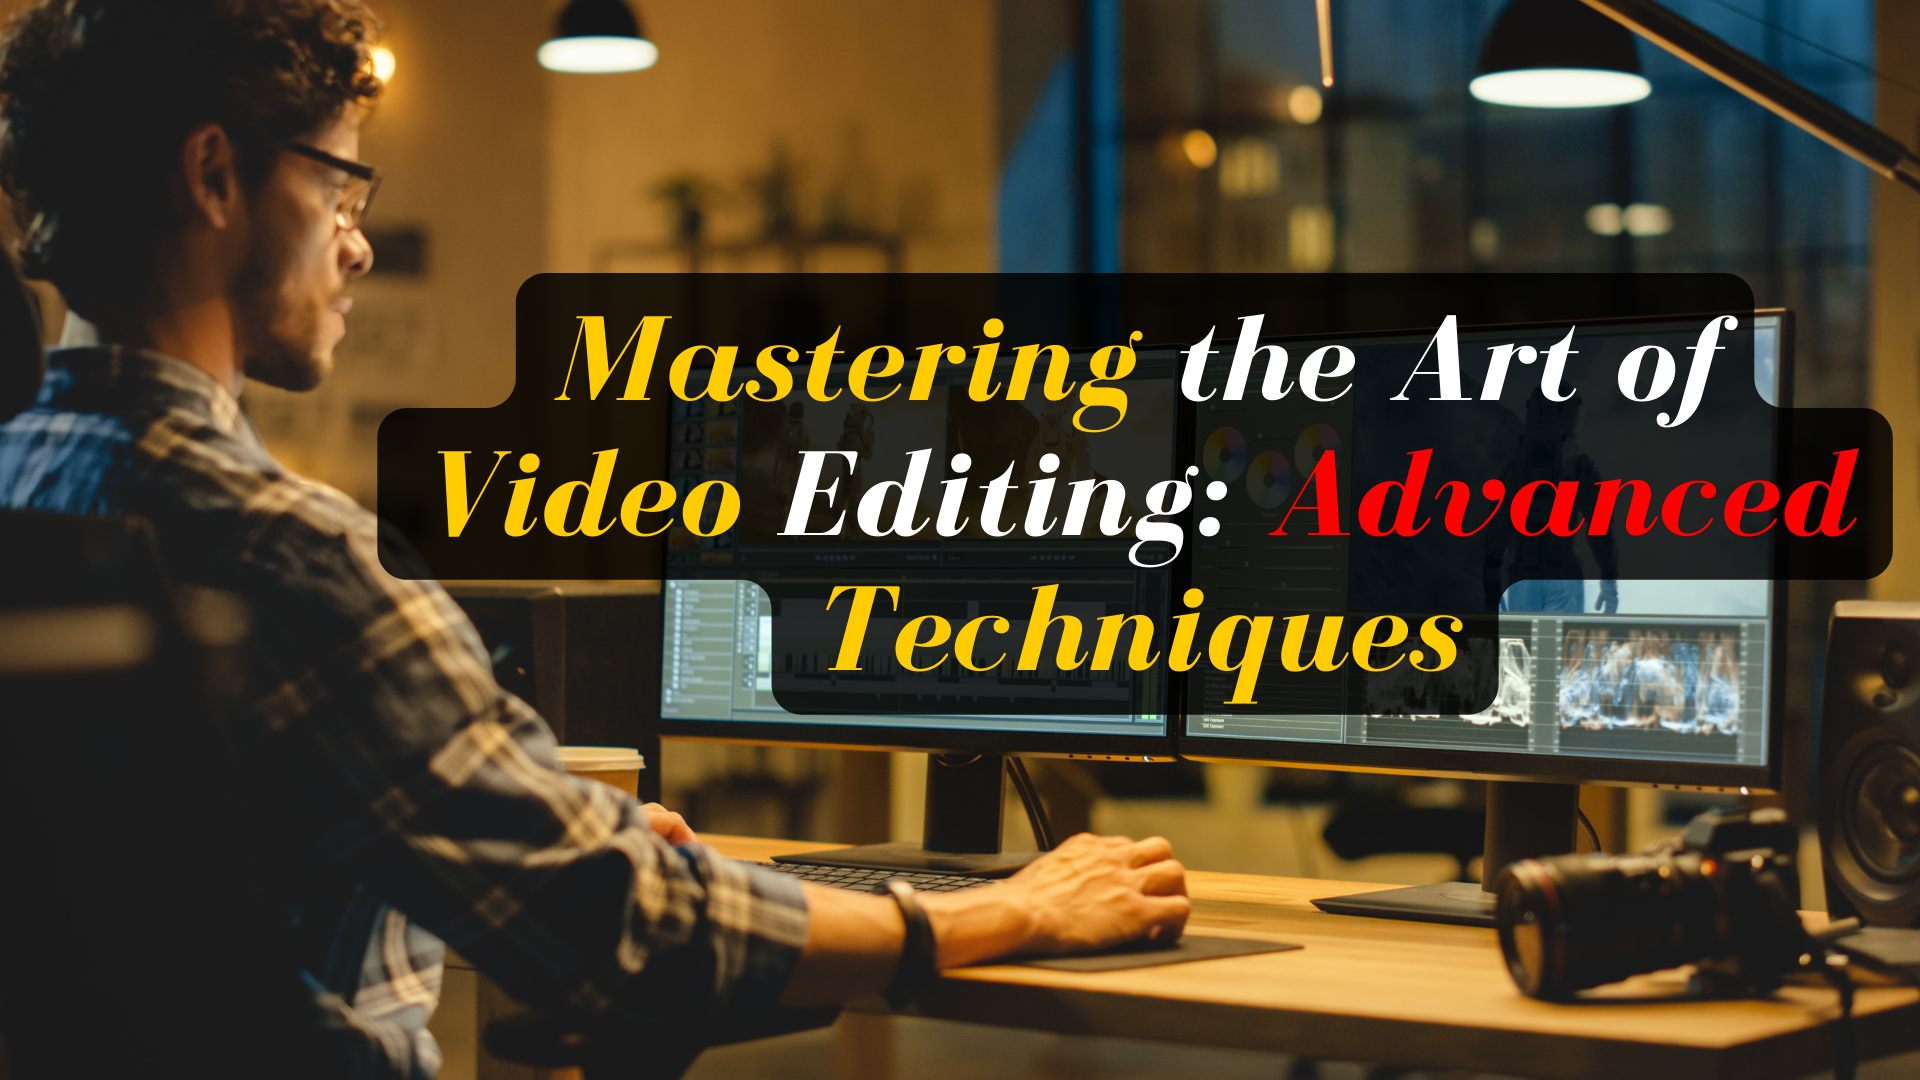 Mastering the Art of Video Editing: Advanced Techniques